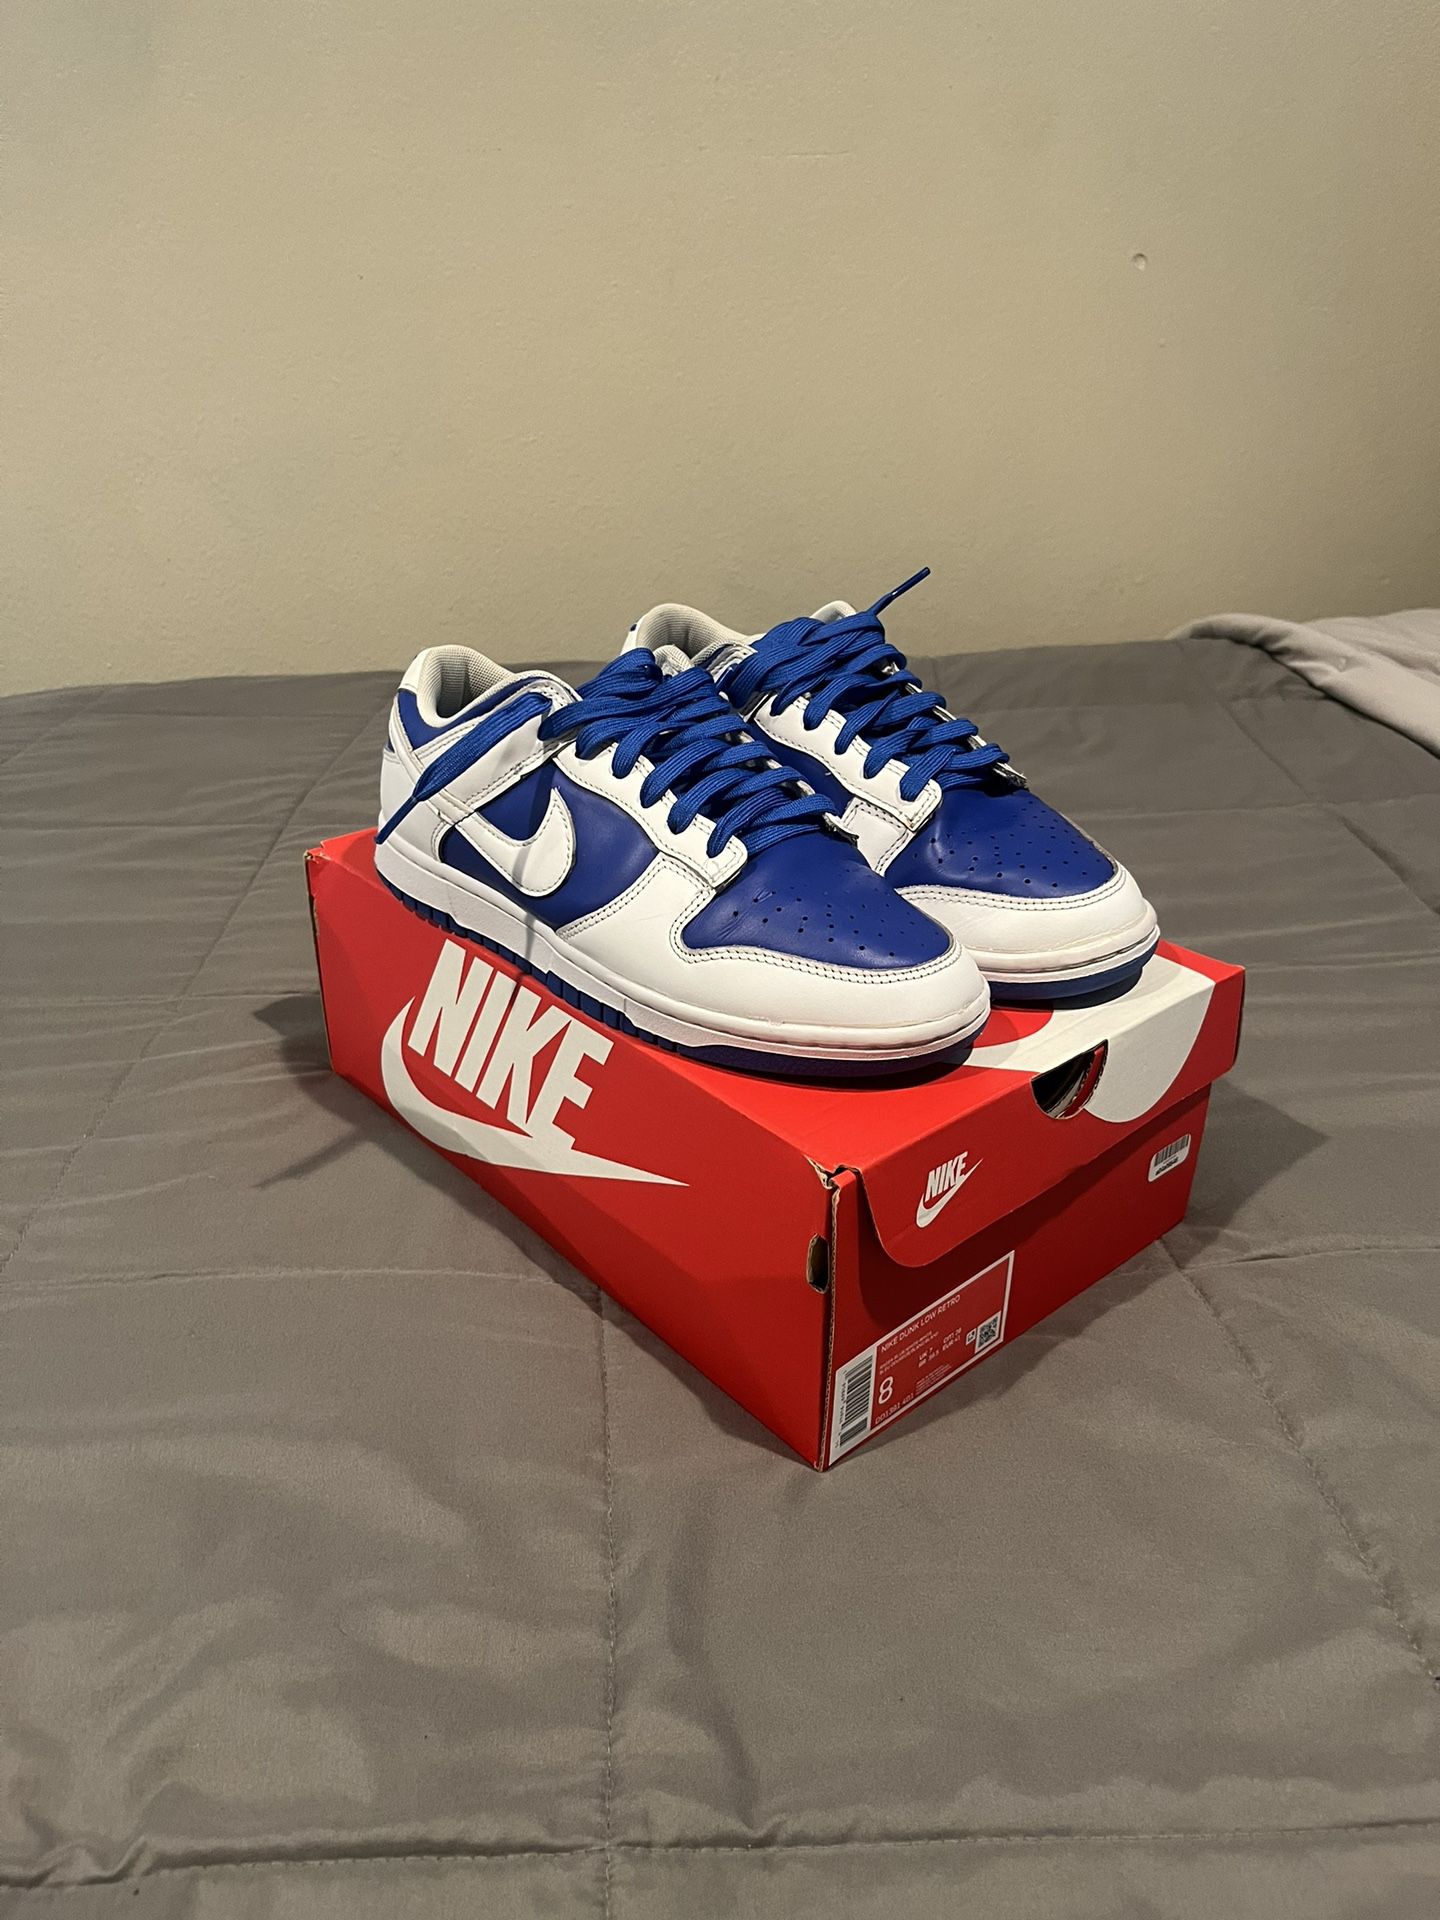 Dunk Low Racer Blue!!! NEED GONE ASAP!!!